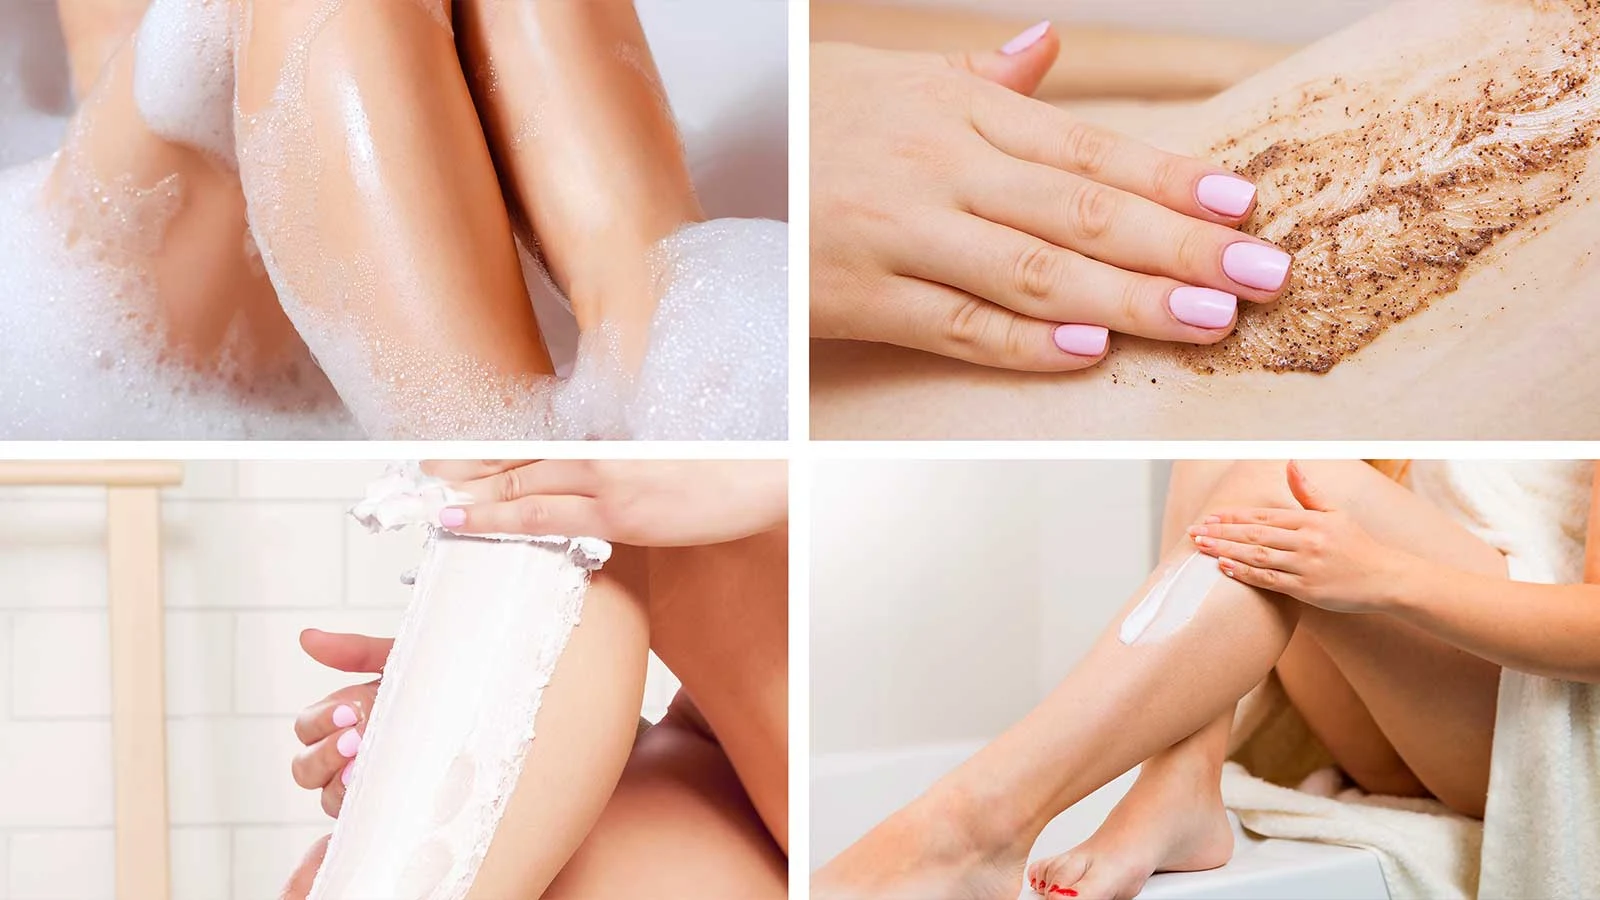 Collage of four pictures showing female legs in a bubbly bath, female hand applying brown scrubbing product to her leg, woman wiping off hair removal cream from her leg, and a woman applying cream to her leg